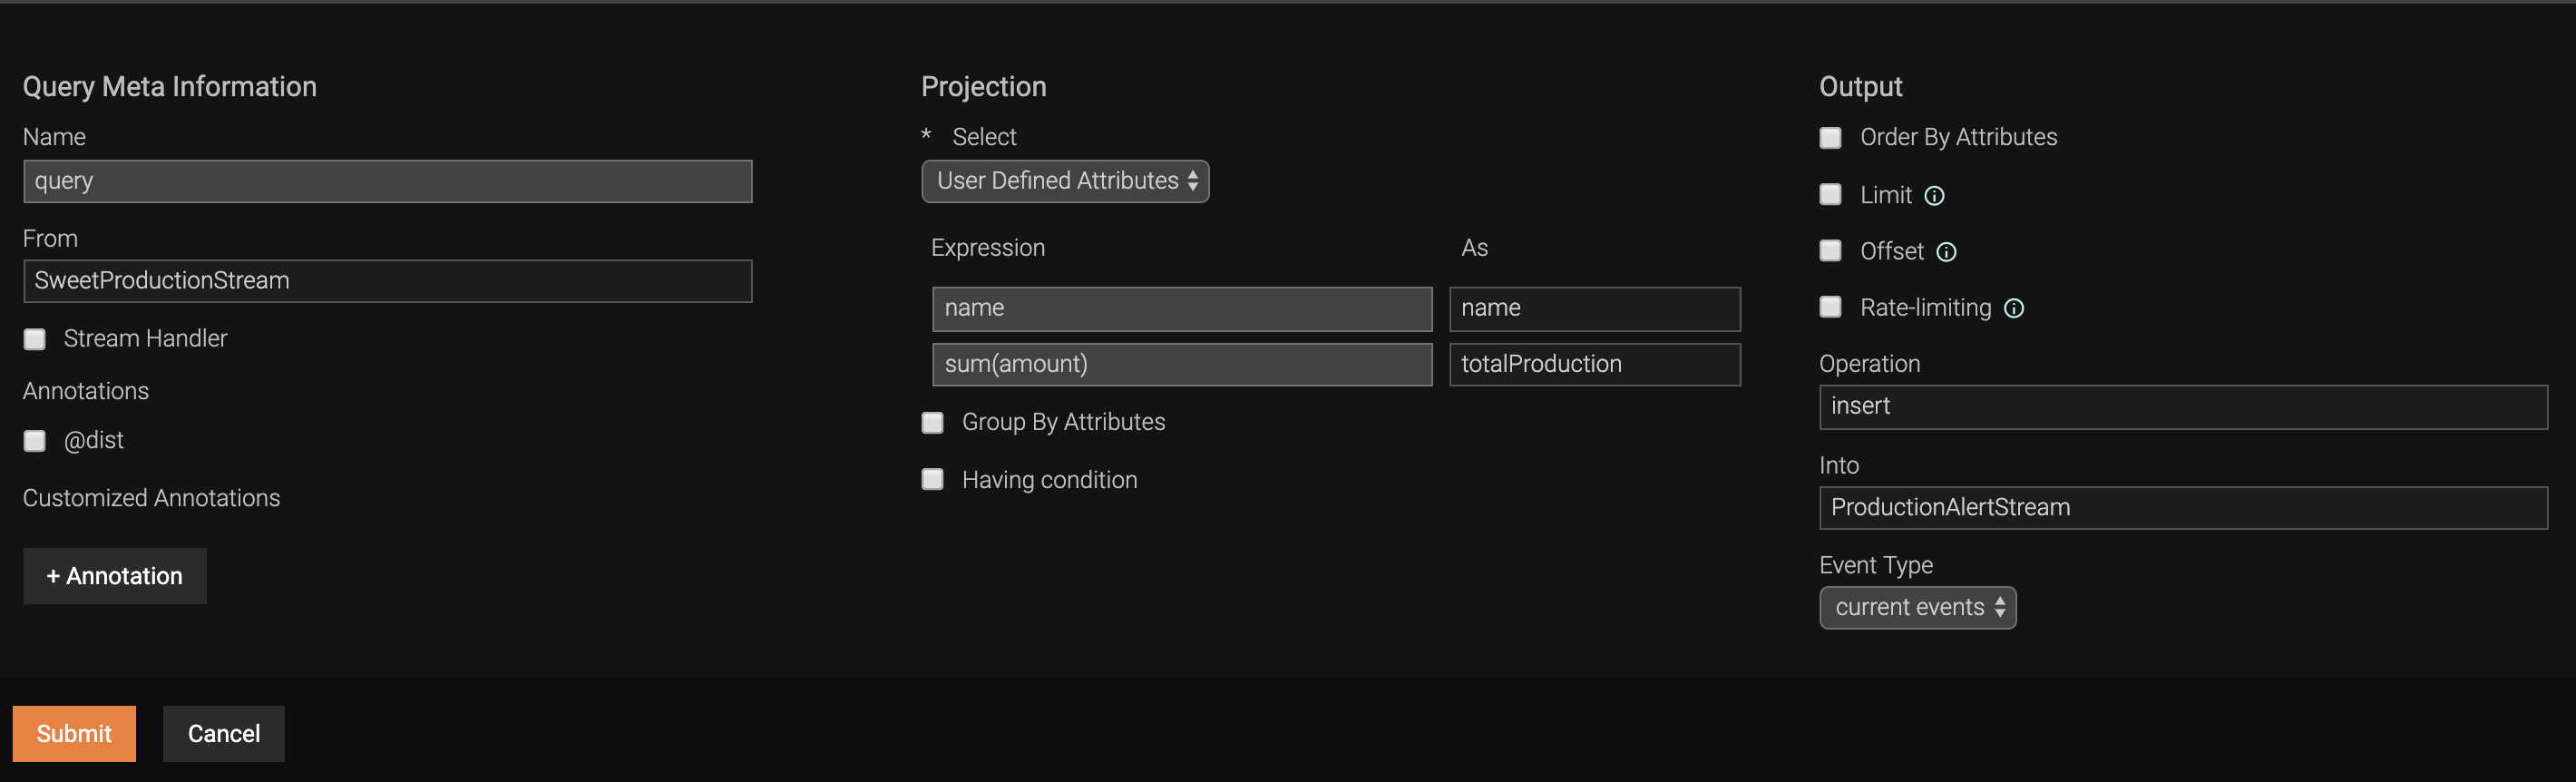 Configuring the projection query